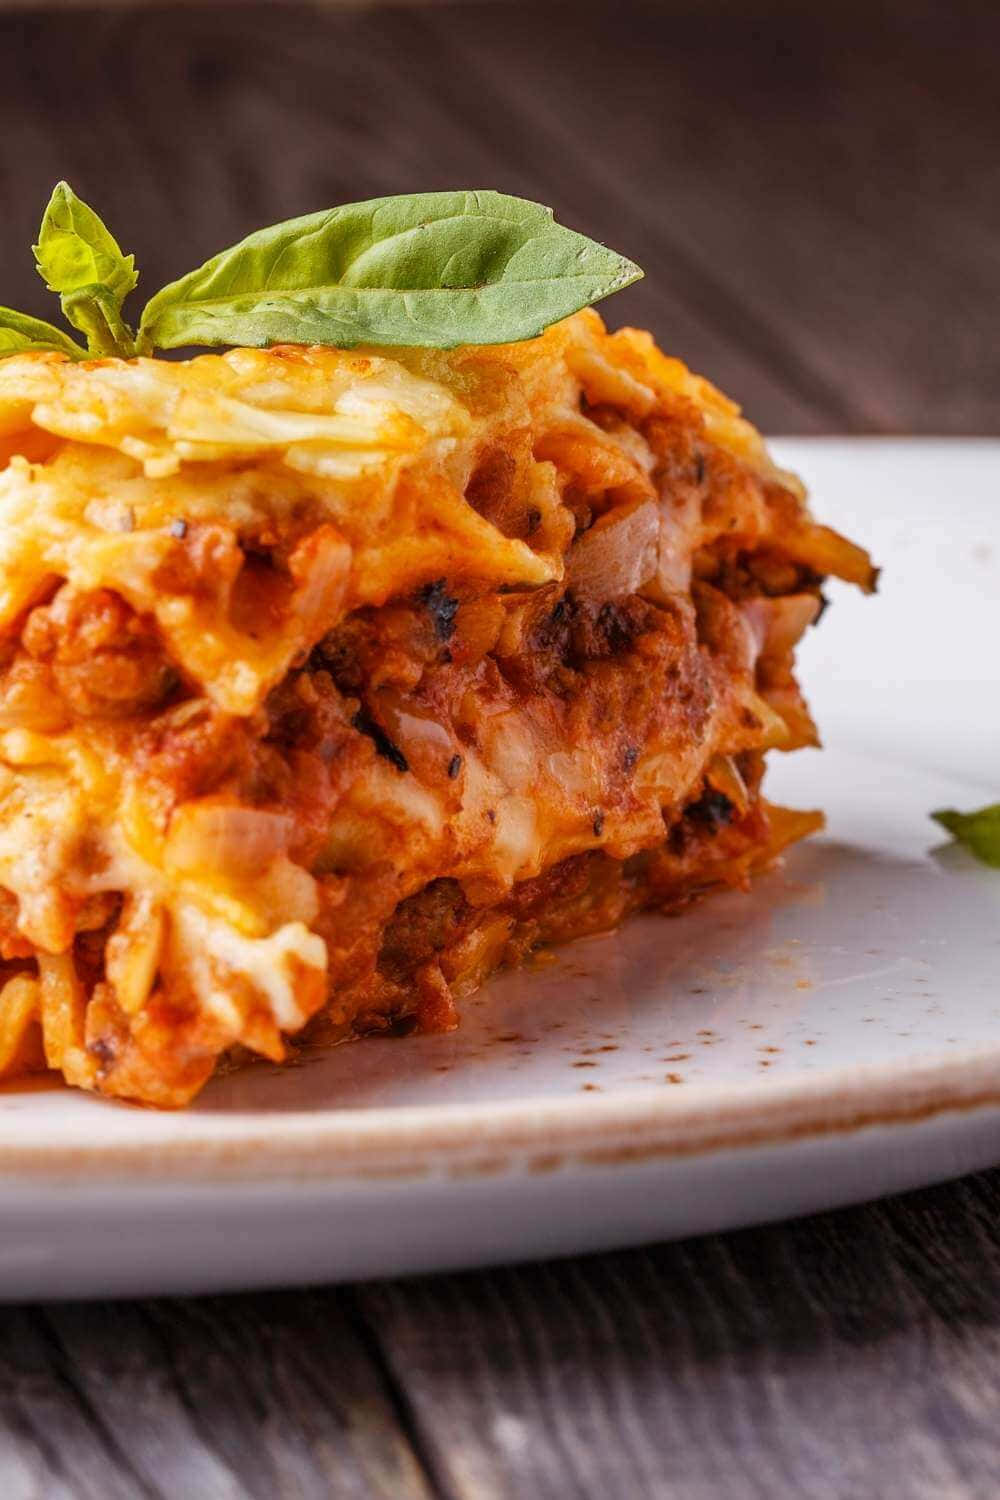 Satisfying Slice of Authentic Lasagna Alla Bolognese Wallpaper